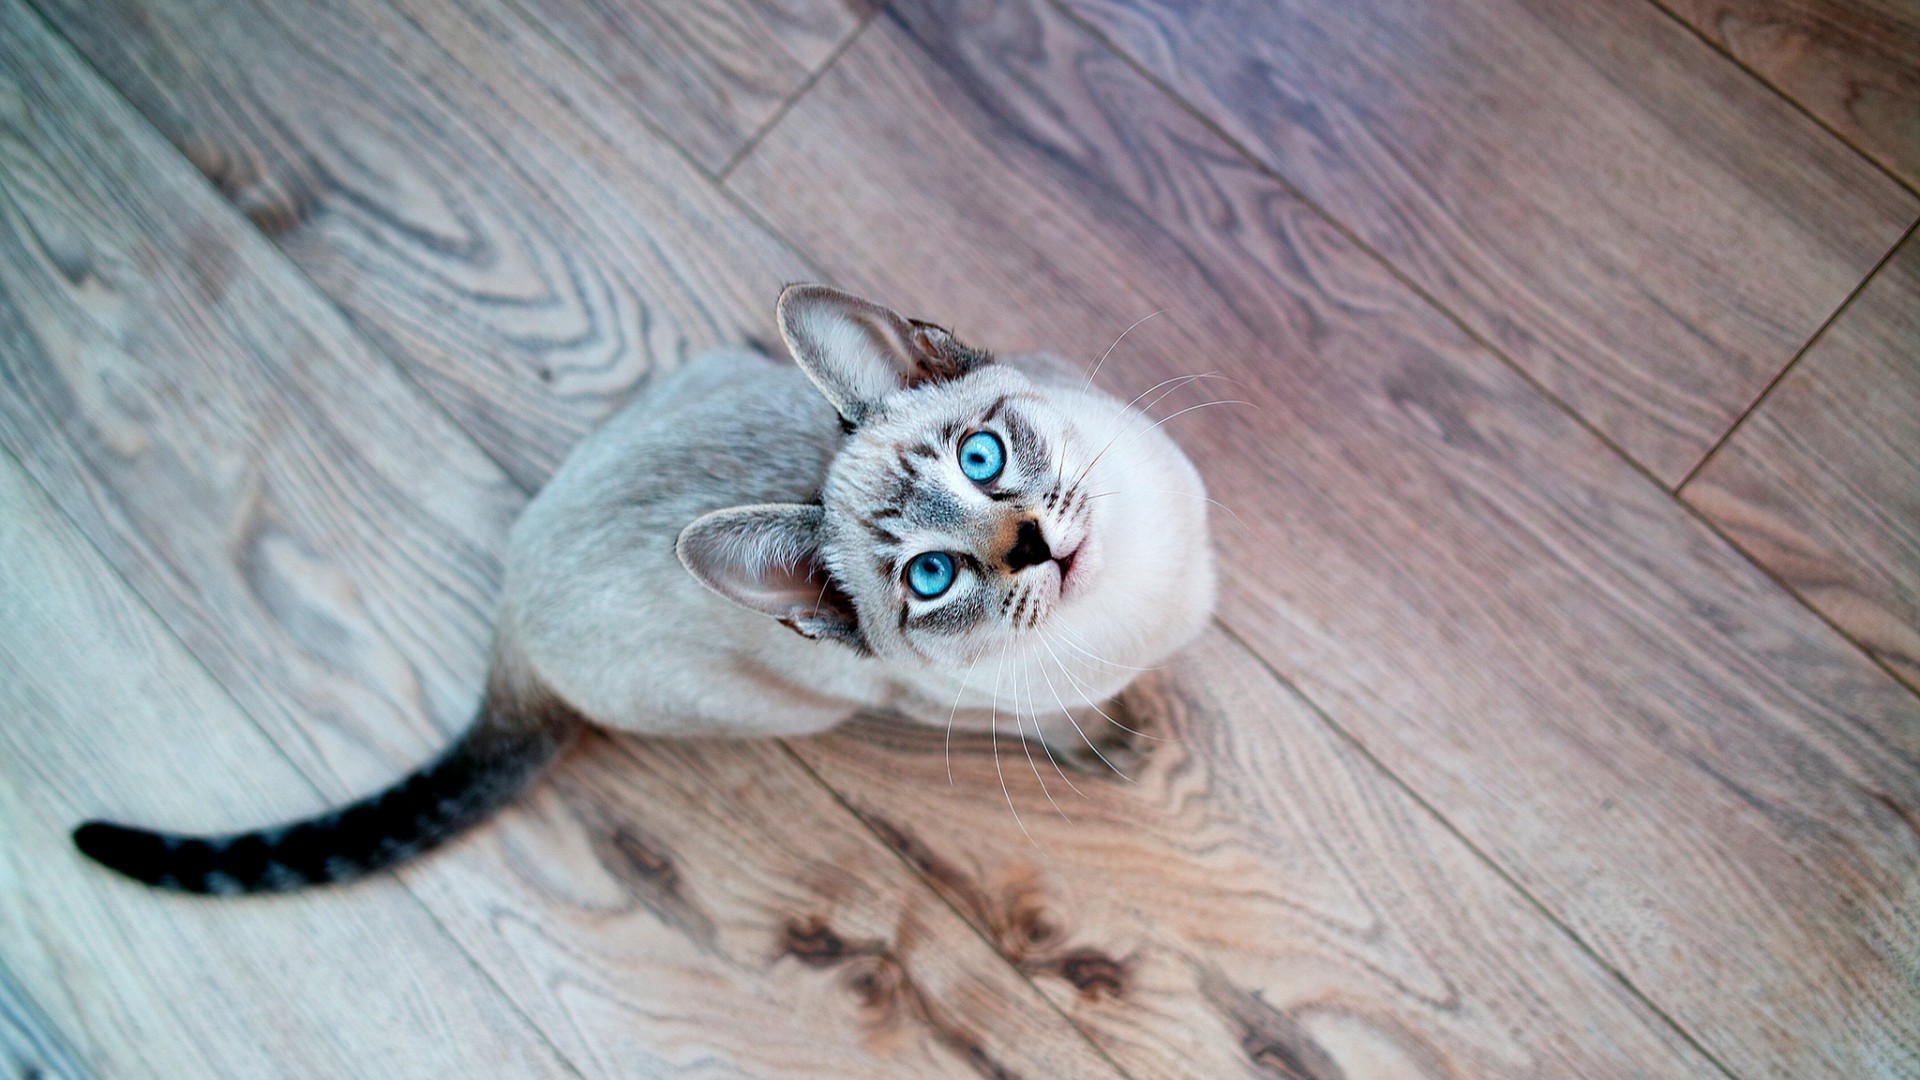 General 1920x1080 cats looking up animals wooden surface blue eyes mammals indoors animal eyes